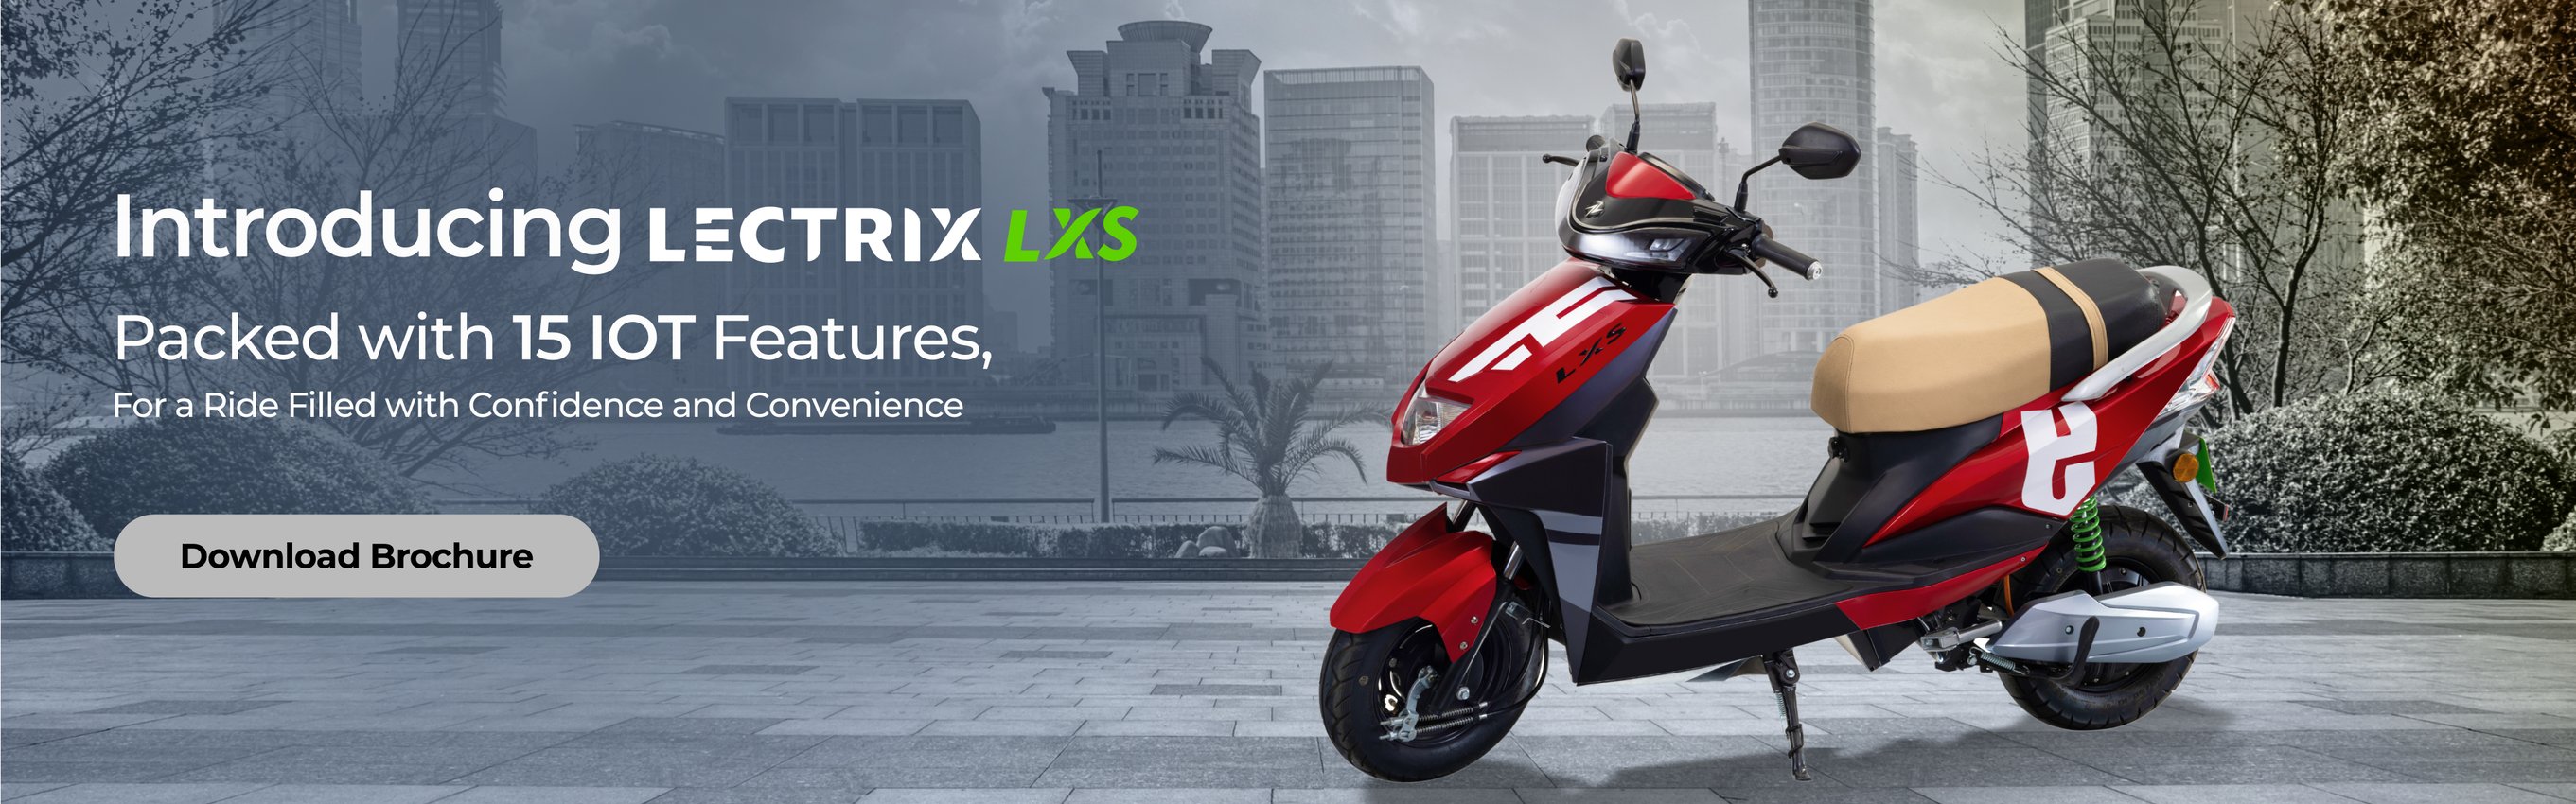 Scooty Lectrix LXS 2.0 Price in India | Electric Bike/Scooty Price Image